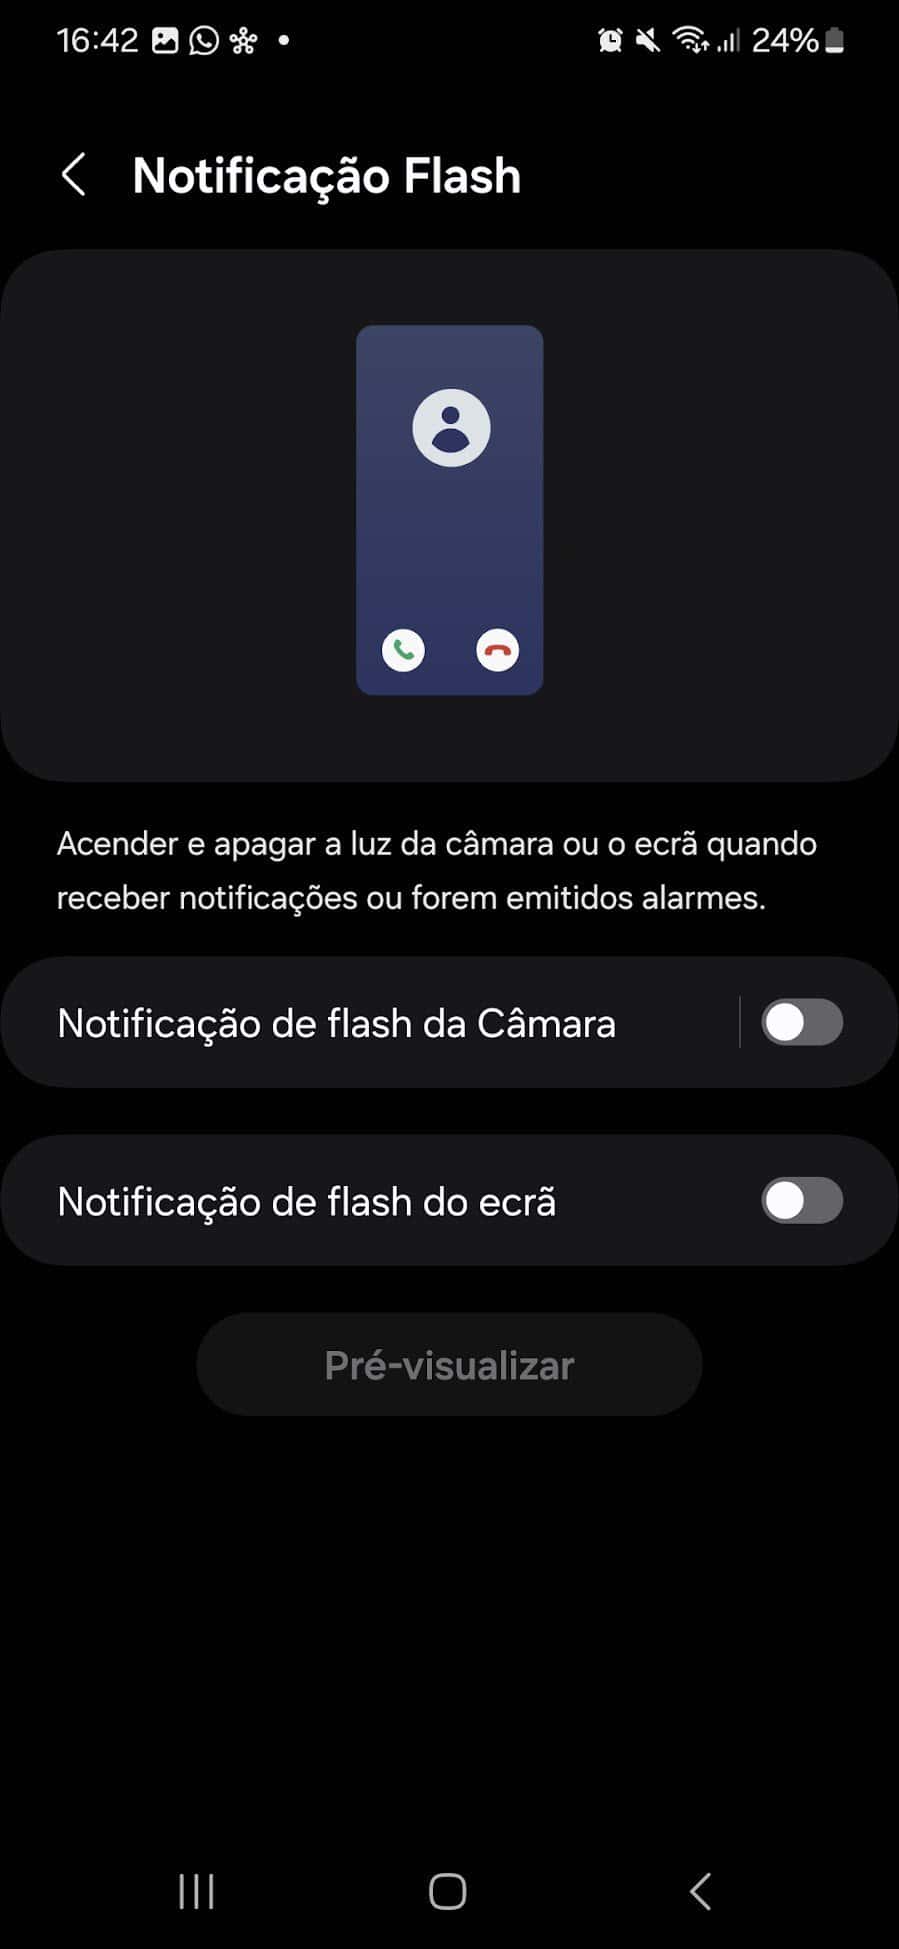 use the camera flash for notifications